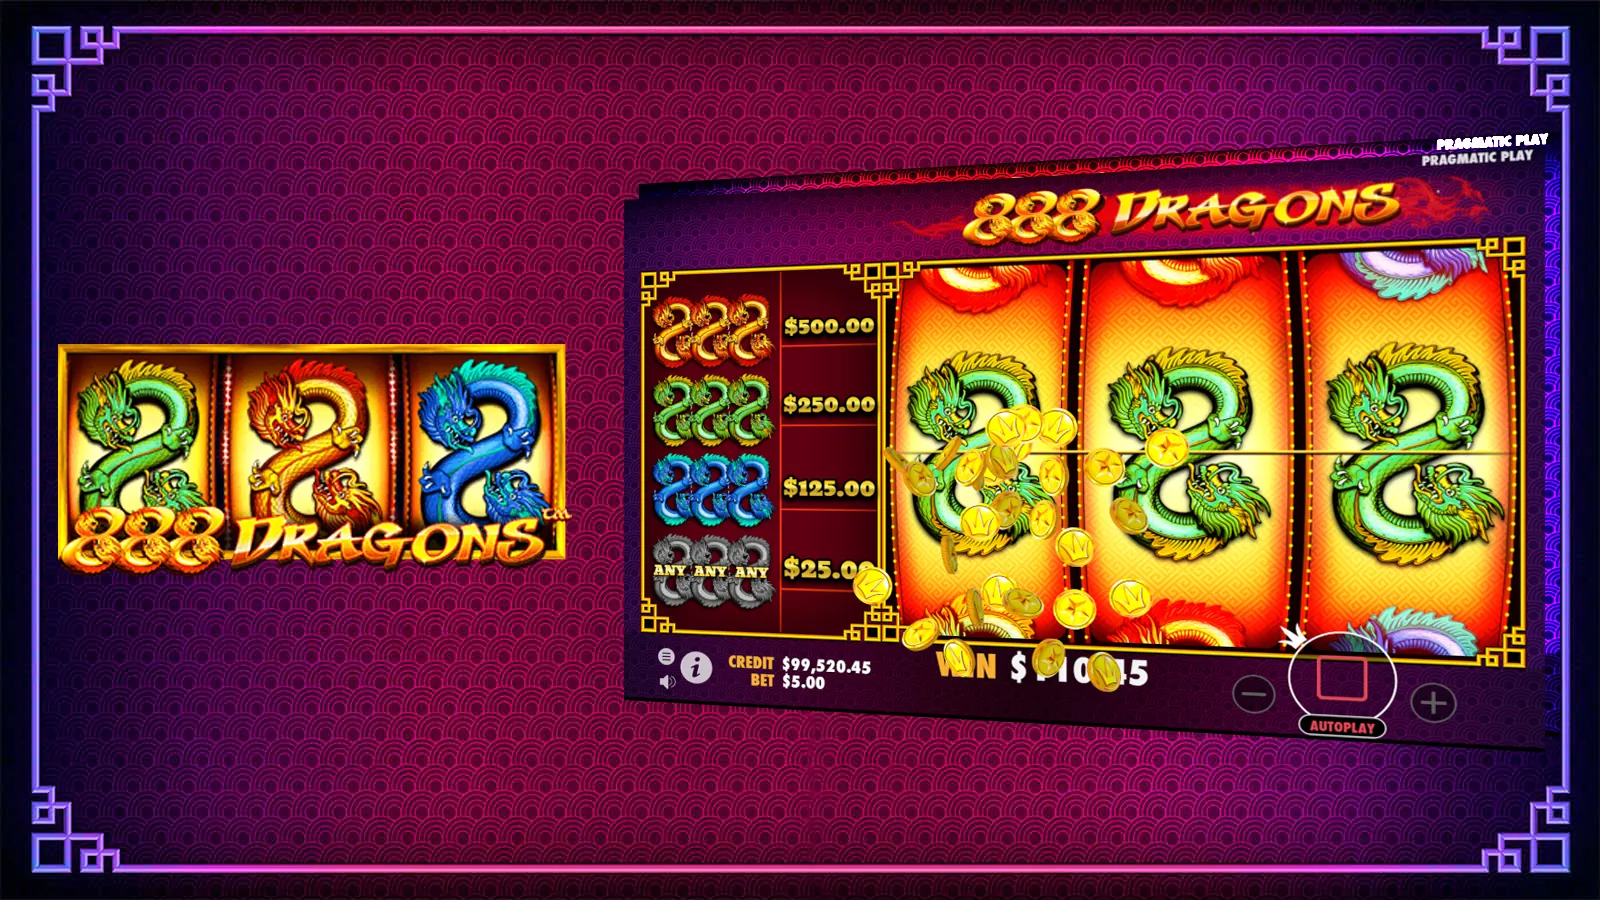 Play 888 Dragons for free. Empire777 free credit RM30. Register account to get free credits.